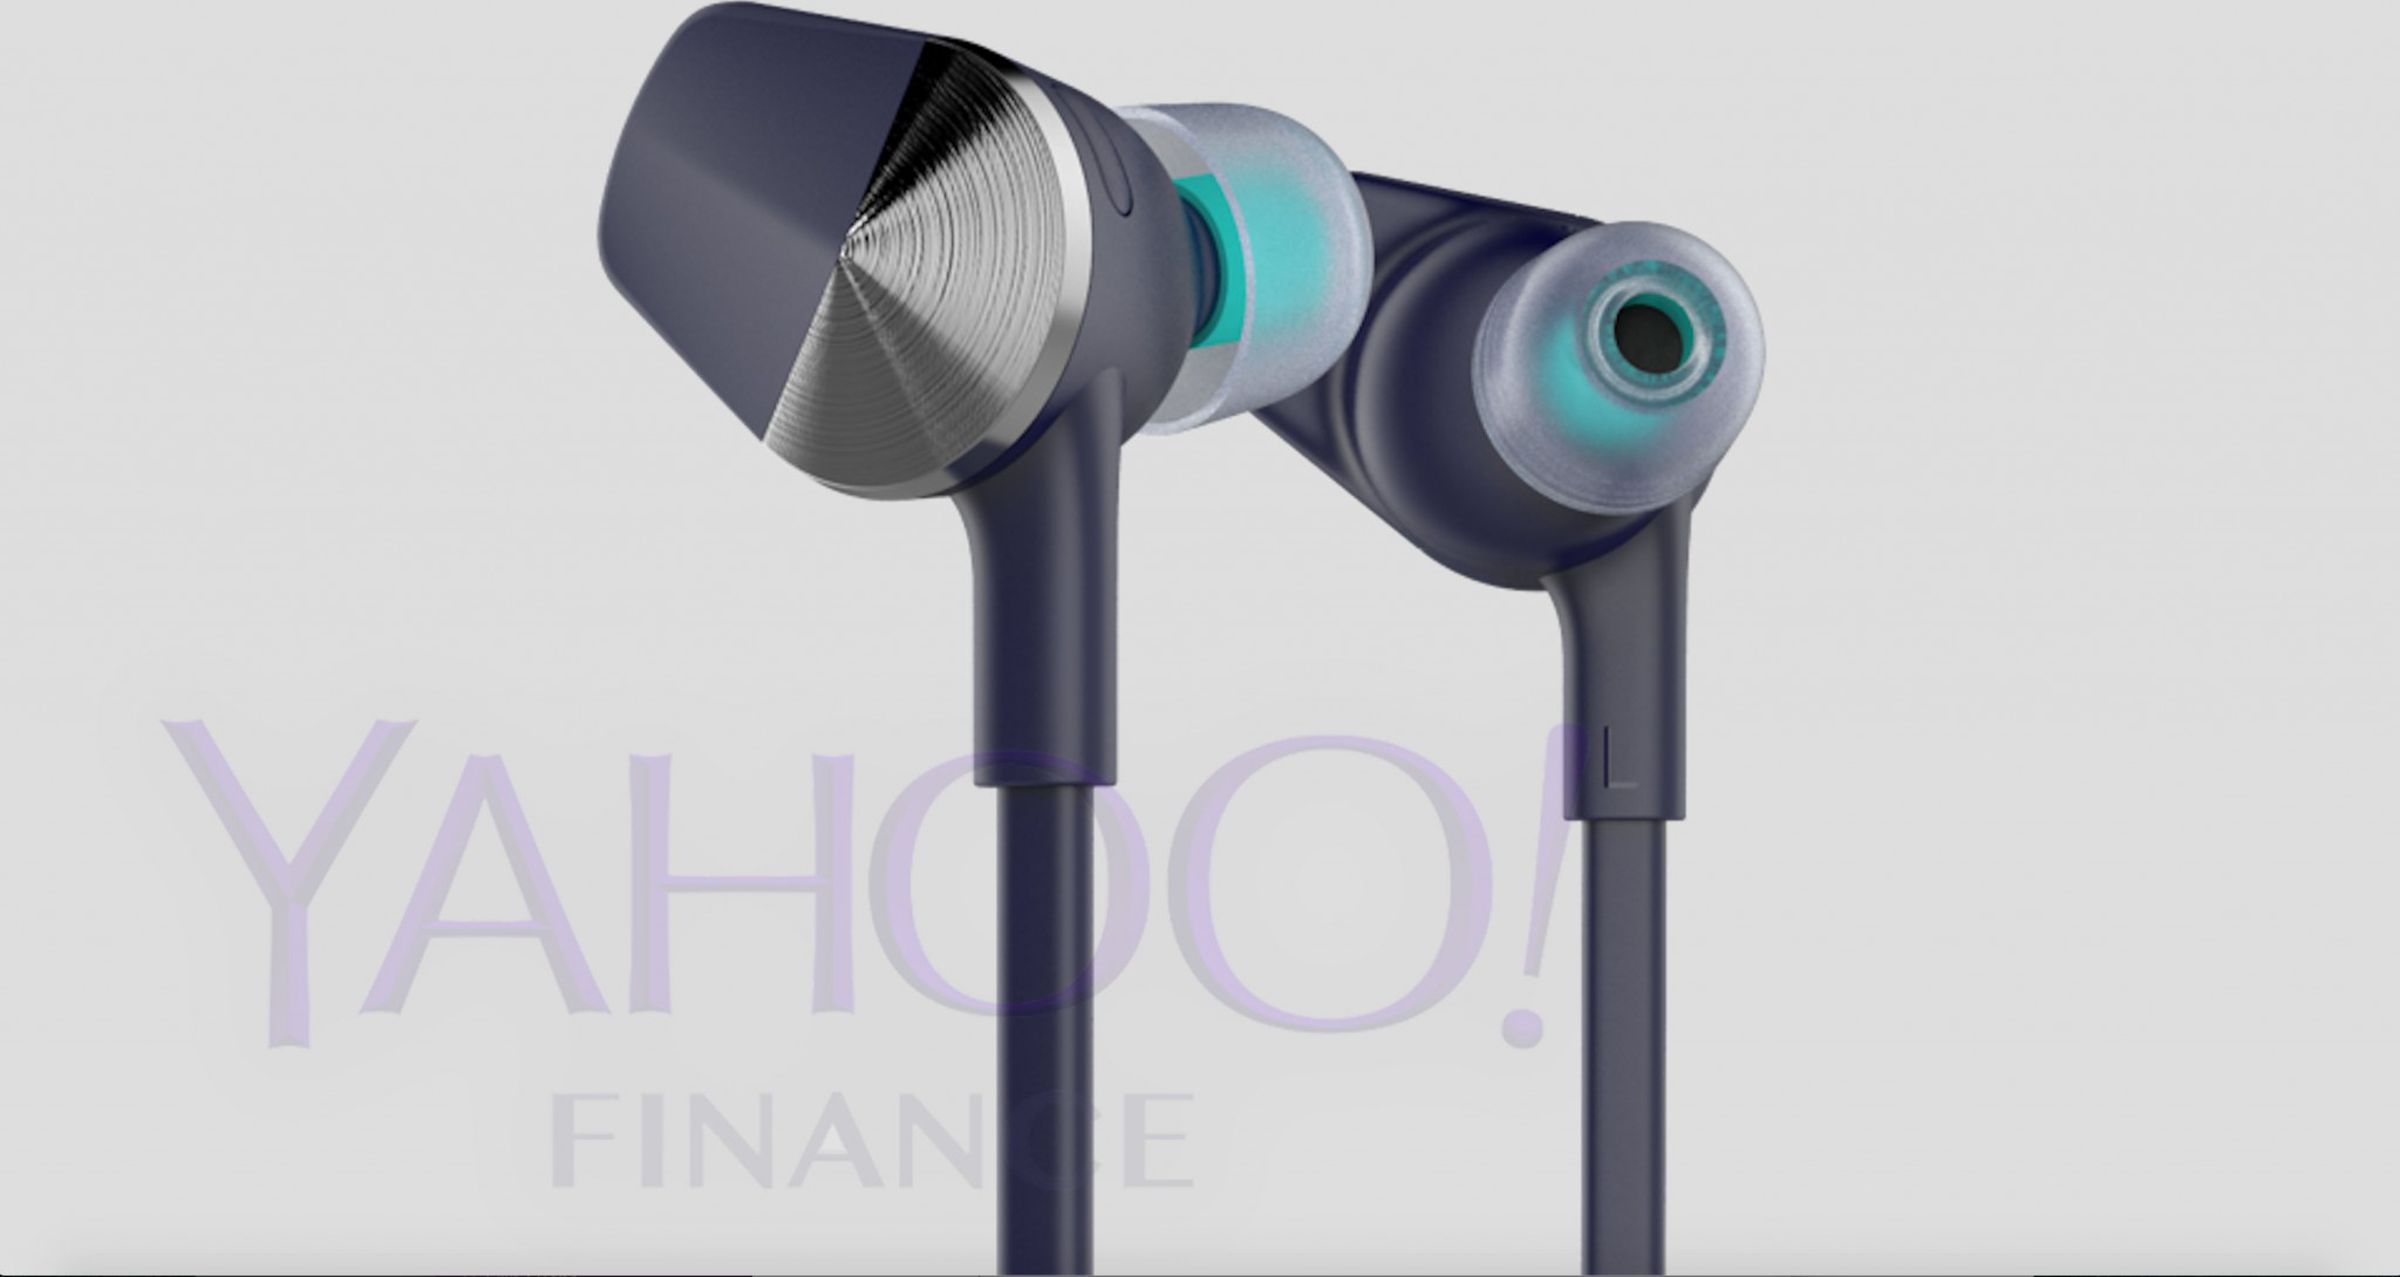 Leaked image of Fitbit’s not-yet-announced Bluetooth headphones.